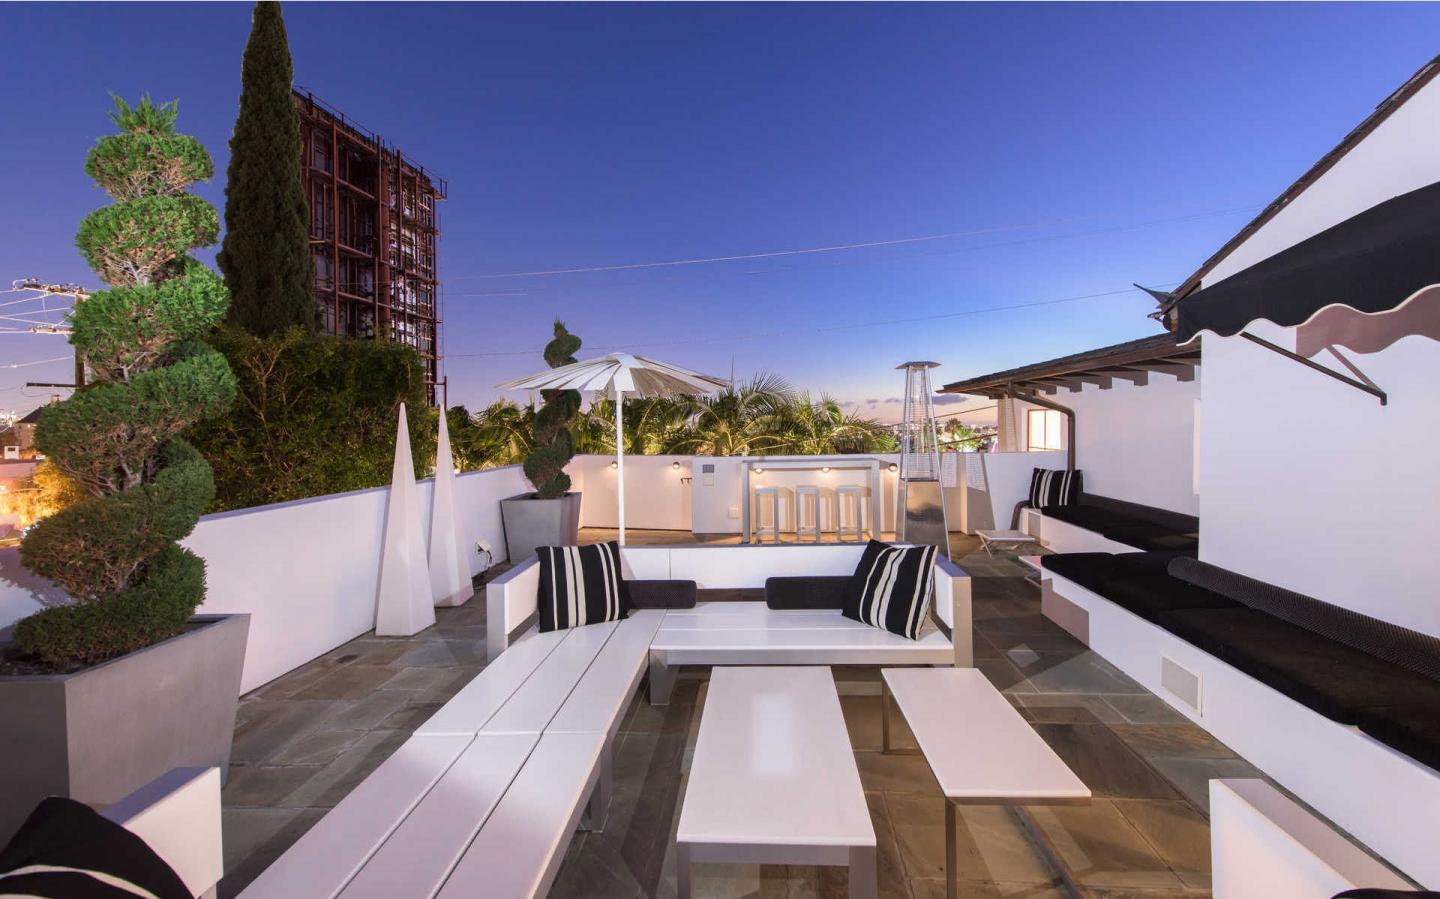 The stunning rooftop terrace puts Los Angeles's iconic night views on full display